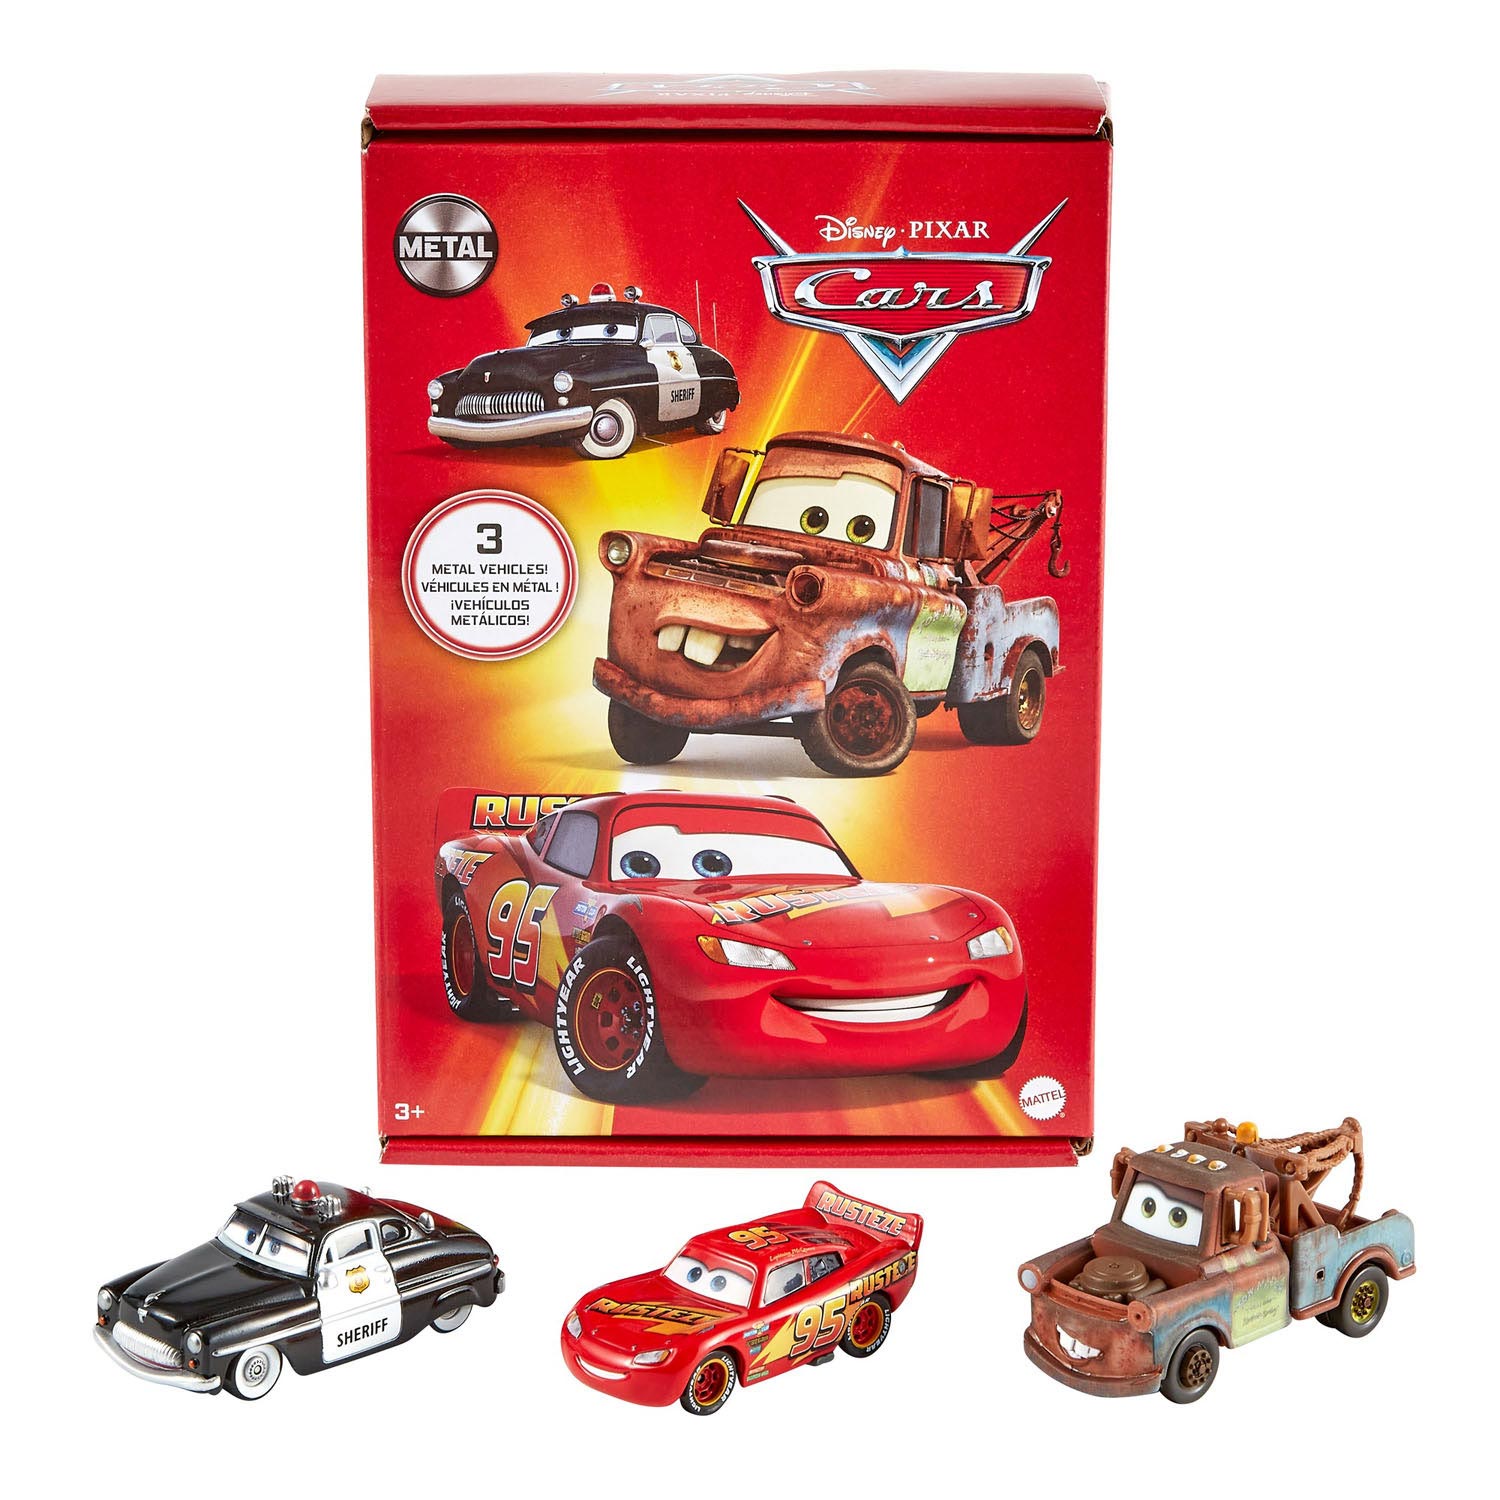 Cars 3” Will Be About Lightning McQueen Getting His Mojo Back